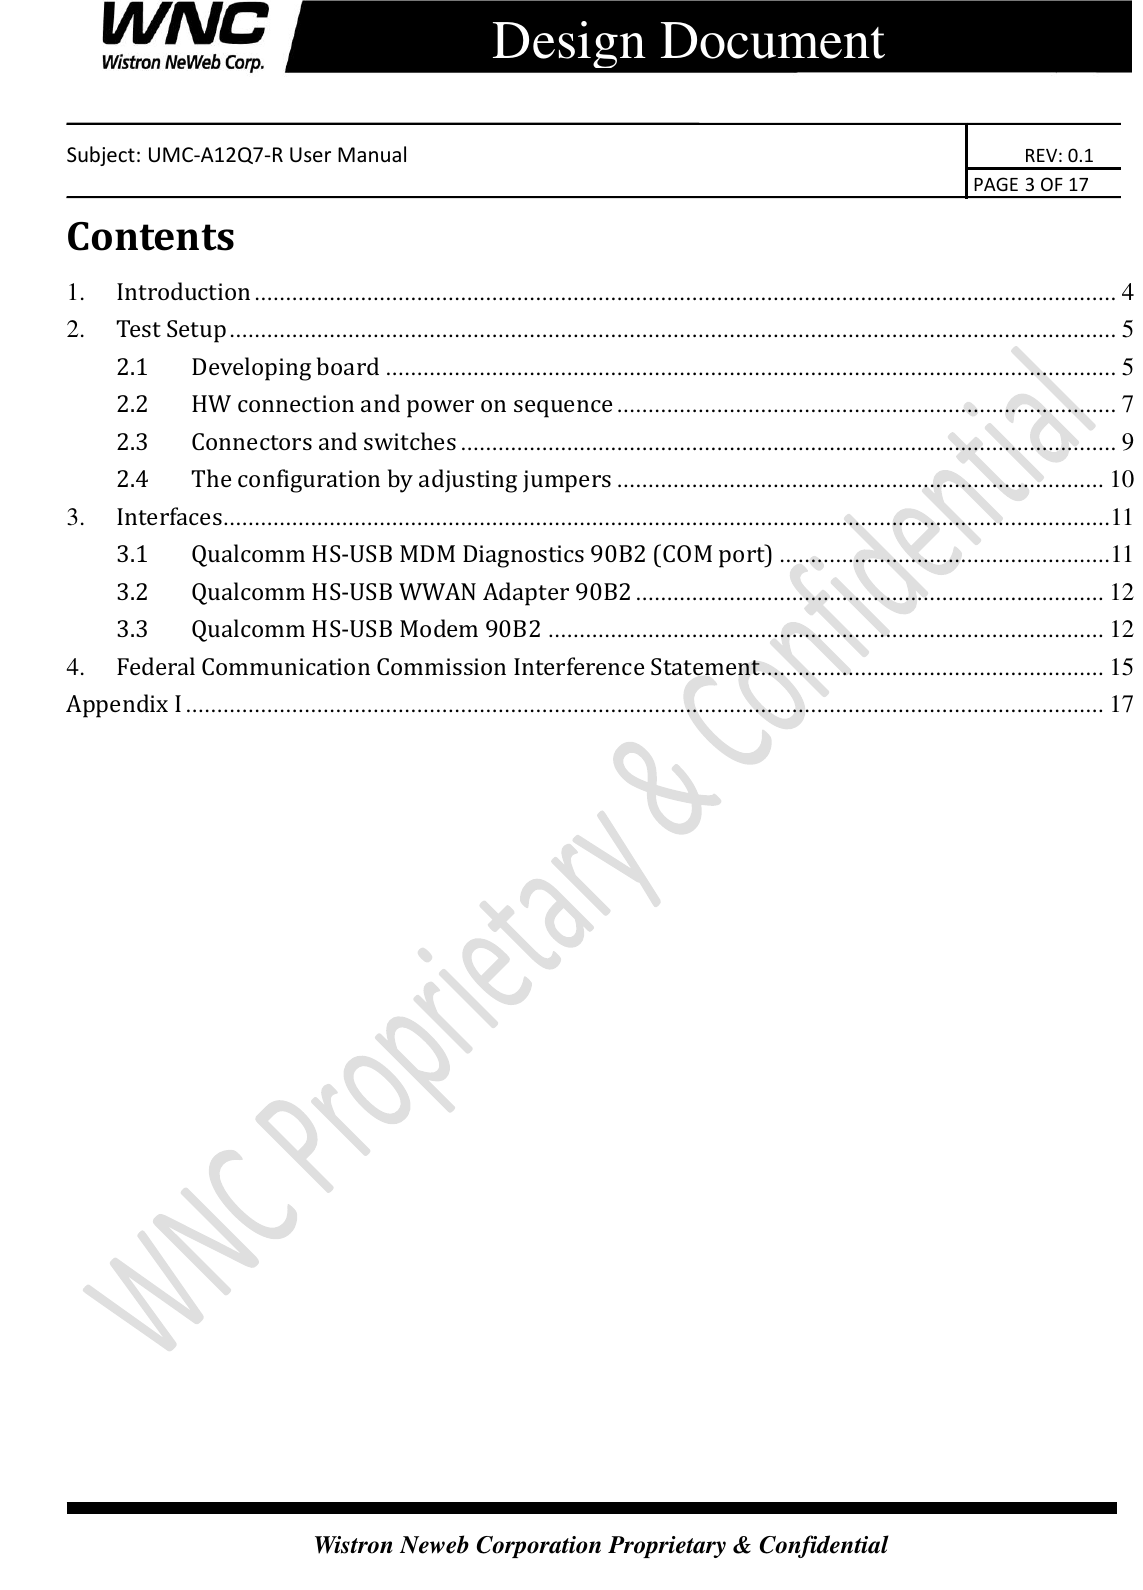    Subject: UMC-A12Q7-R User Manual                                                                      REV: 0.1                                                                                        PAGE 3 OF 17  Wistron Neweb Corporation Proprietary &amp; Confidential      Design Document Contents 1. Introduction .......................................................................................................................................... 4 2. Test Setup .............................................................................................................................................. 5 2.1 Developing board ..................................................................................................................... 5 2.2 HW connection and power on sequence ................................................................................ 7 2.3 Connectors and switches ......................................................................................................... 9 2.4   The configuration by adjusting jumpers .............................................................................. 10 3. Interfaces..............................................................................................................................................11 3.1 Qualcomm HS-USB MDM Diagnostics 90B2 (COM port) .....................................................11 3.2 Qualcomm HS-USB WWAN Adapter 90B2 ........................................................................... 12 3.3 Qualcomm HS-USB Modem 90B2 ......................................................................................... 12 4. Federal Communication Commission Interference Statement ....................................................... 15 Appendix I ................................................................................................................................................... 17                